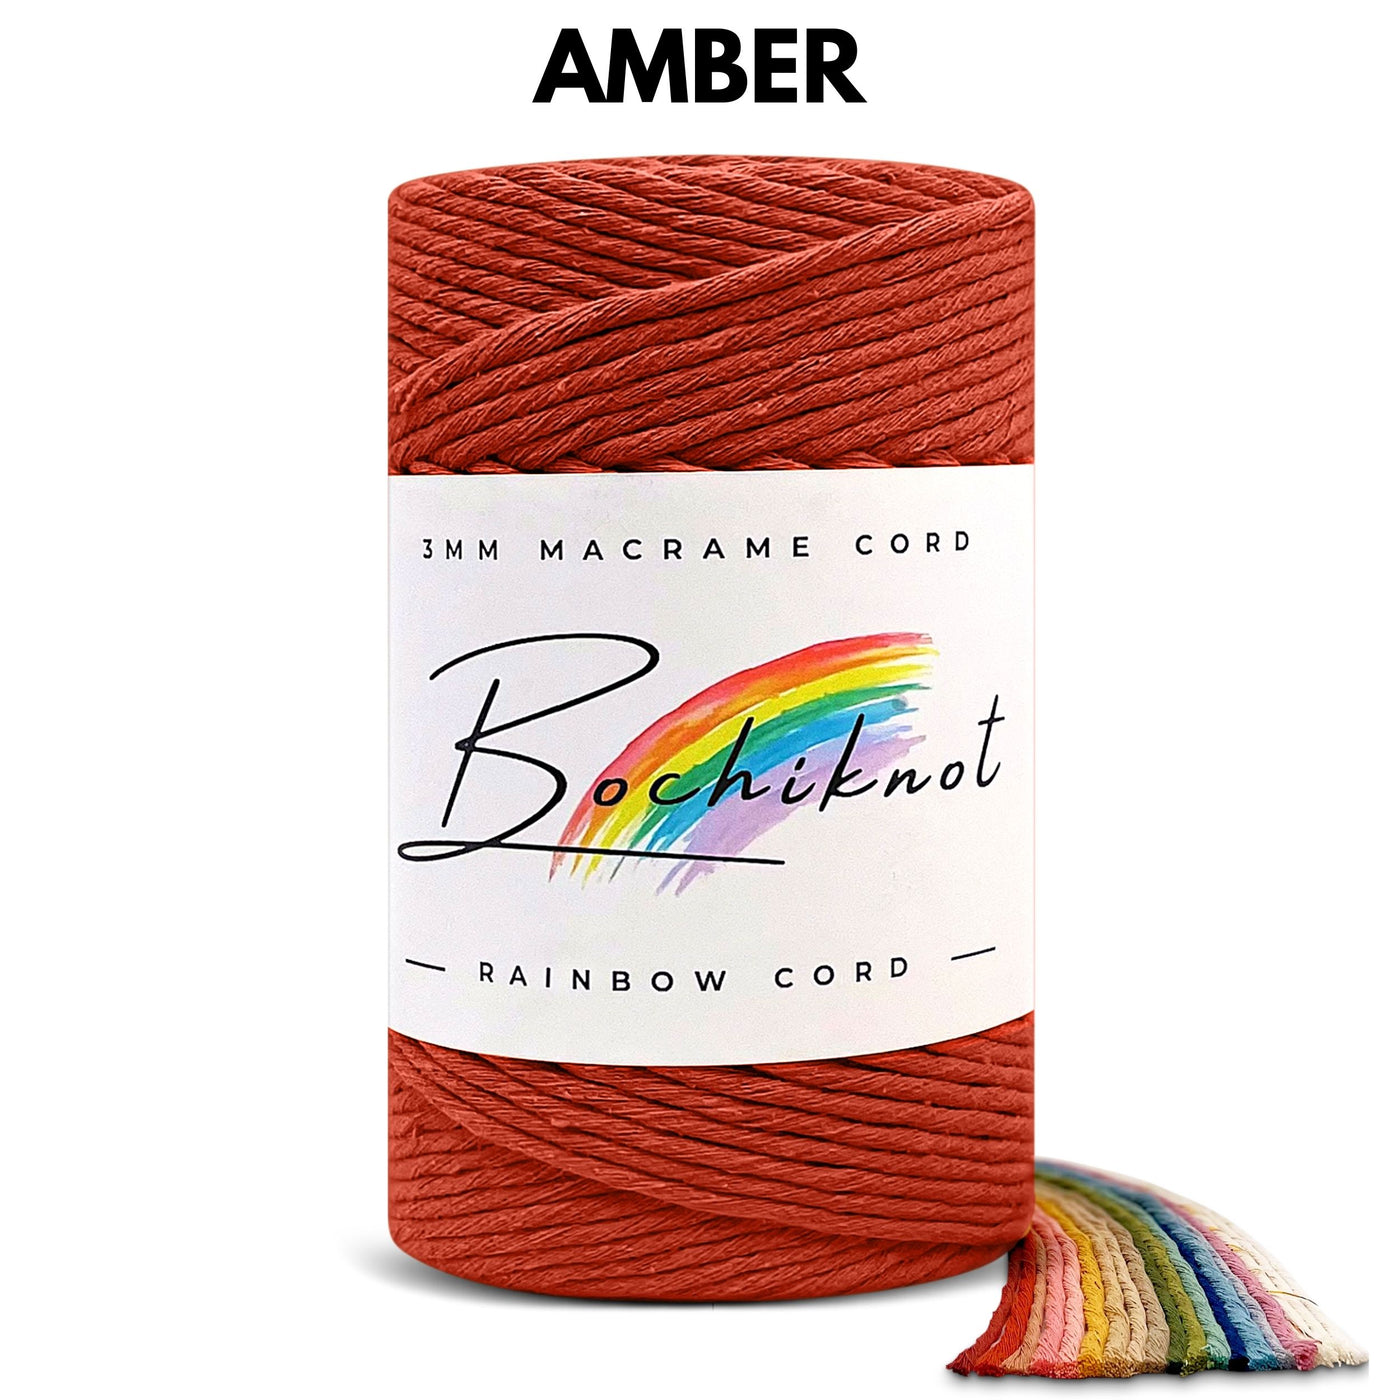 BOCHIKNOT 9mm Thick Macrame Cord - Macrame Supplies Cotton Rope - Macrame  Cotton Cord for Crafts - Macrame Rope Colored Cord - Thick Rope for Crafts  